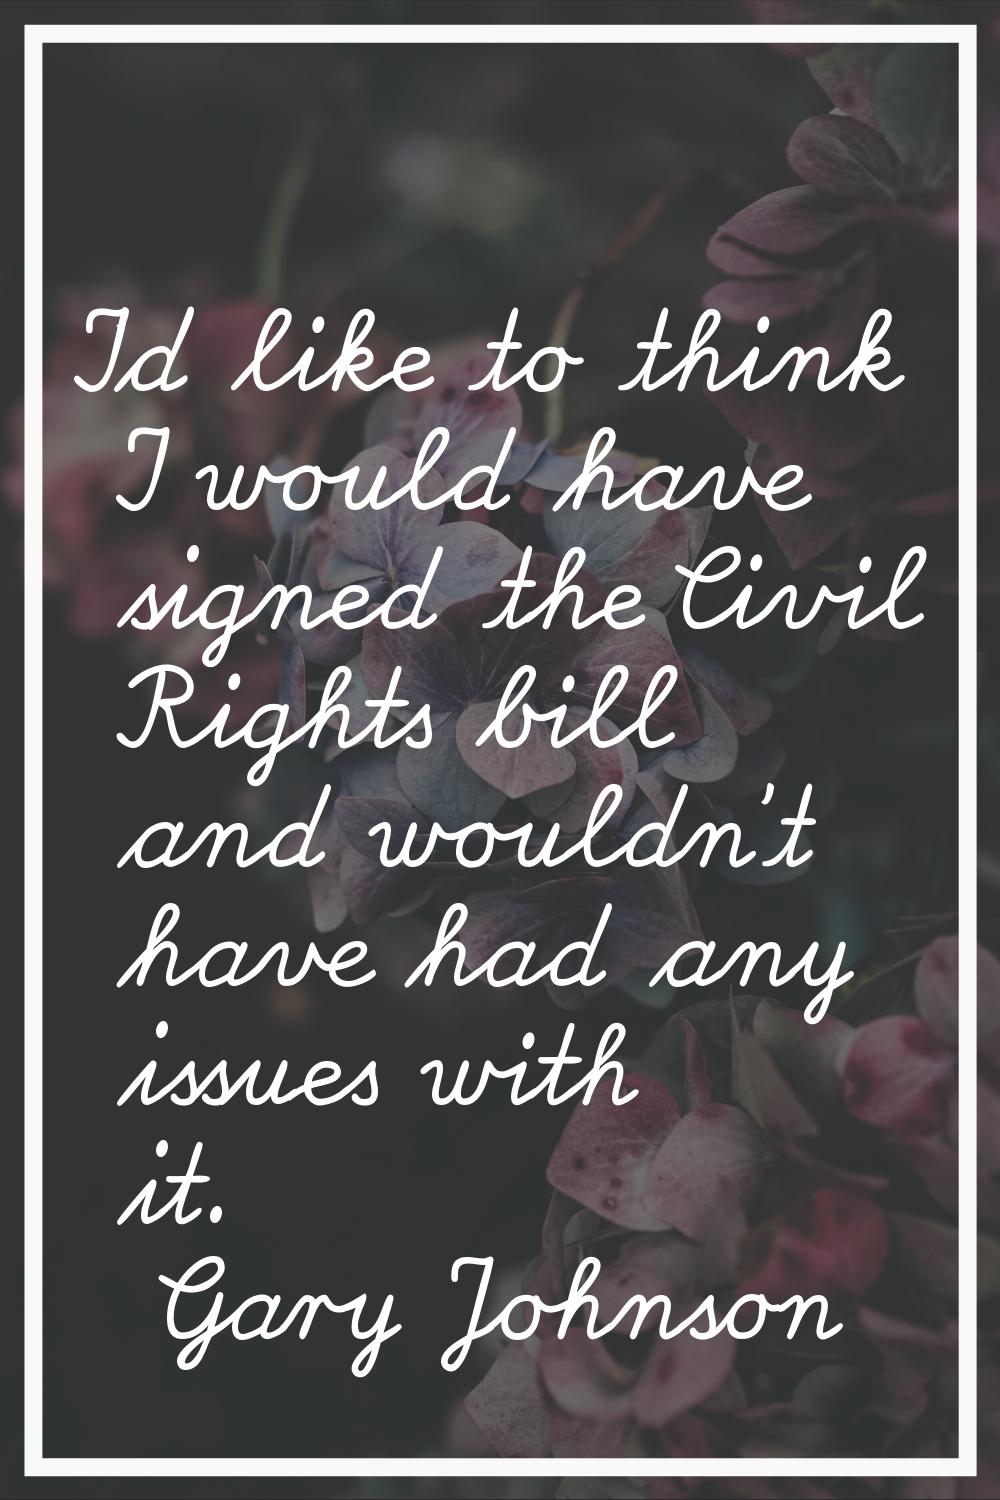 I'd like to think I would have signed the Civil Rights bill and wouldn't have had any issues with i